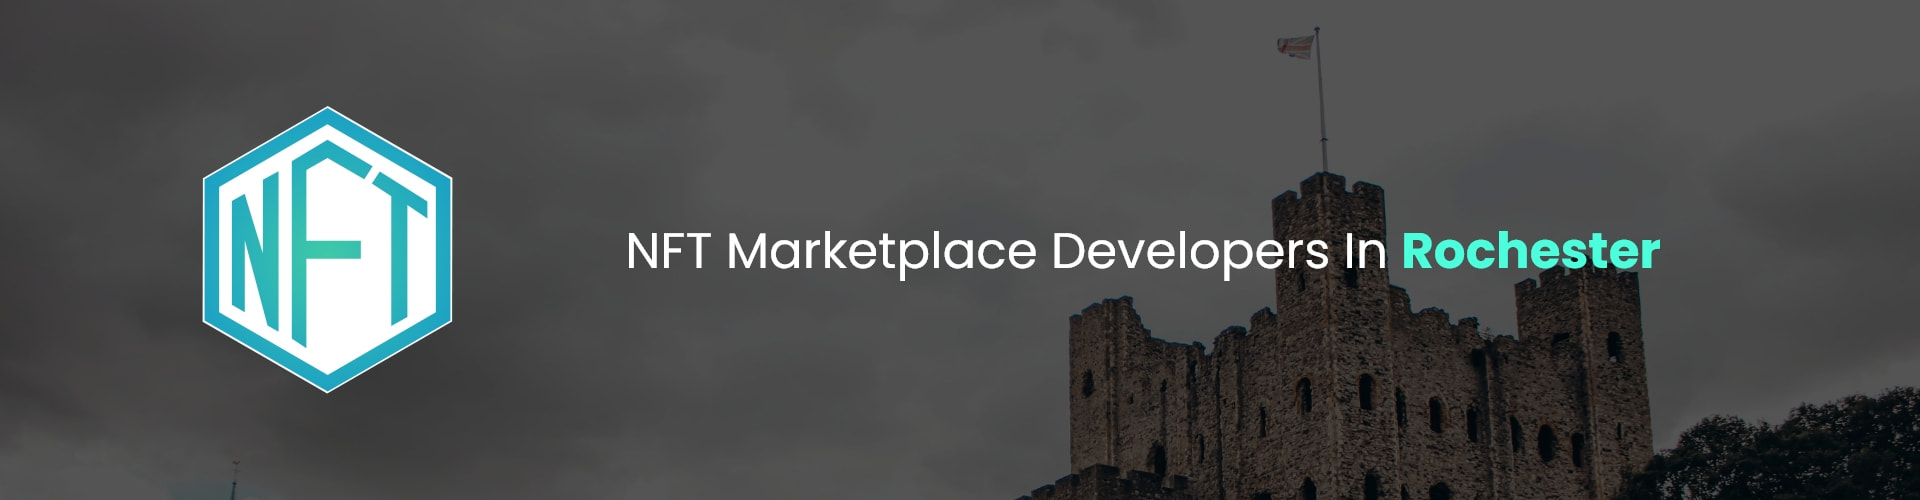 hire nft marketplace developers in rochester